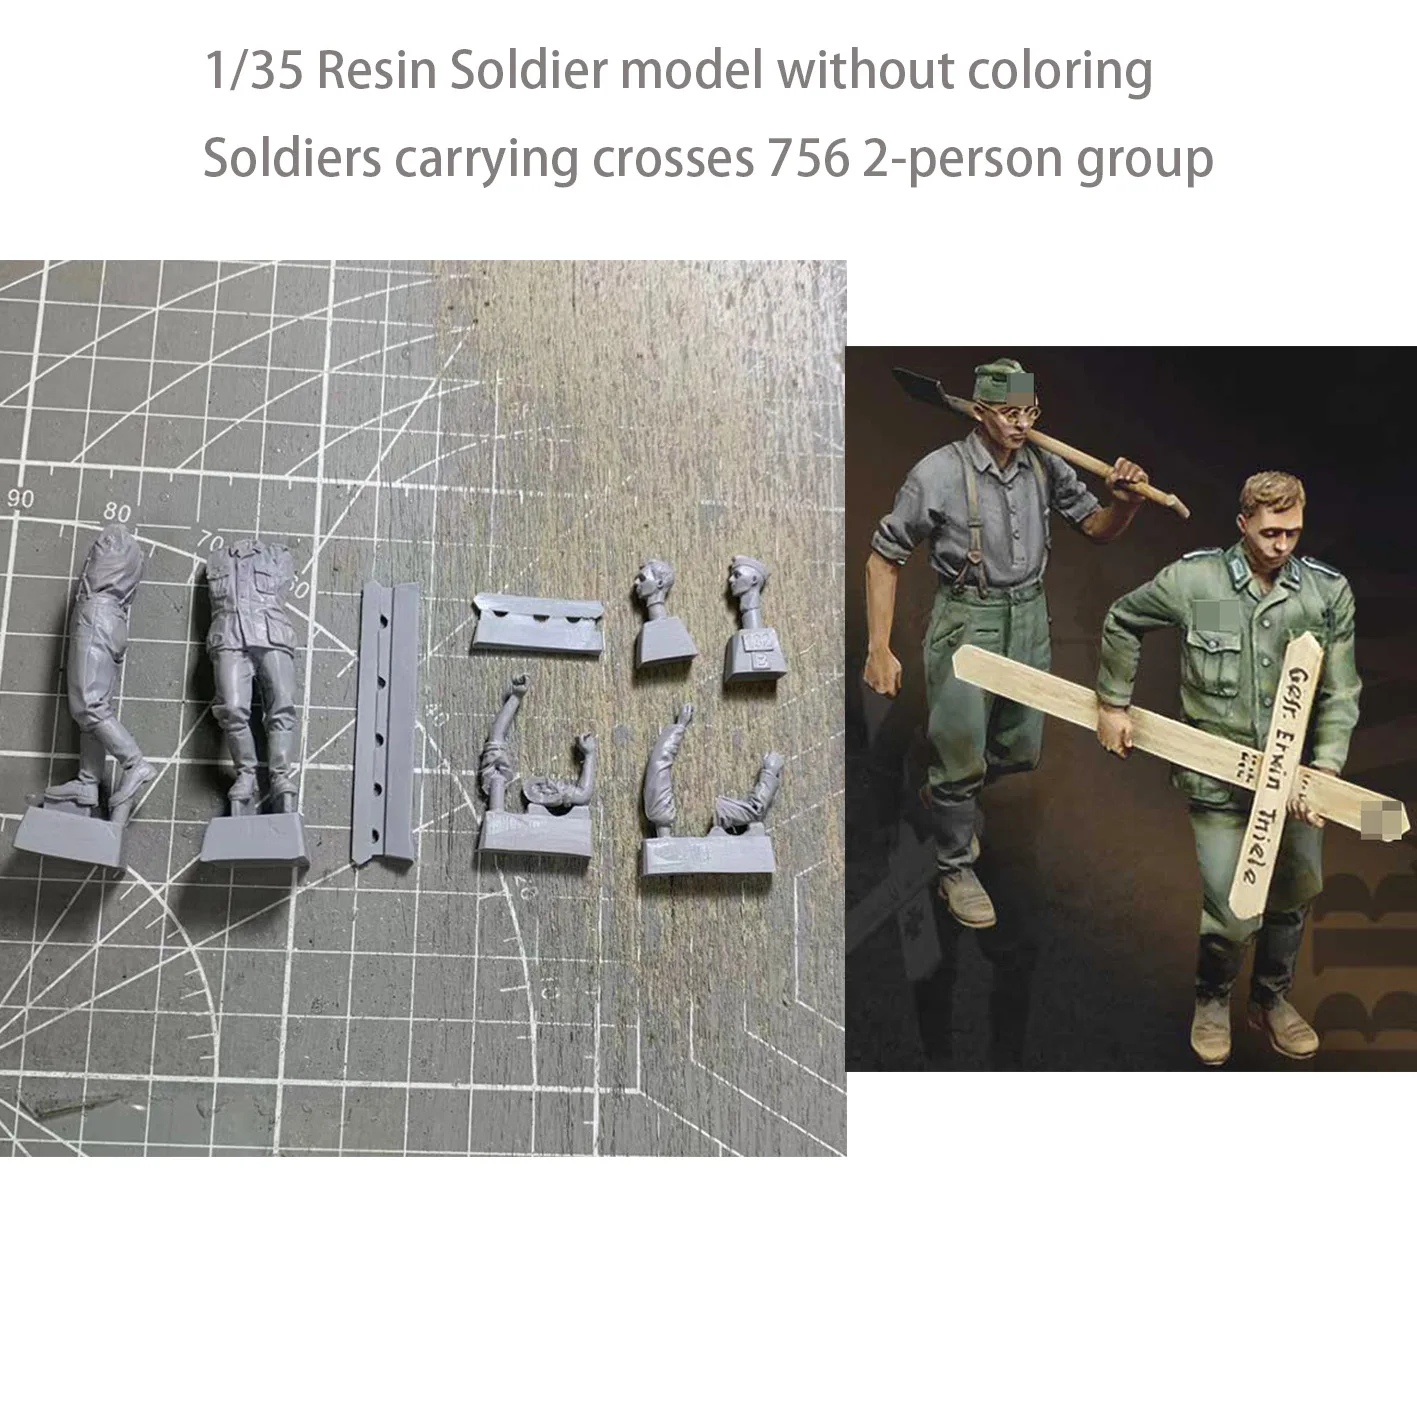 

1/35 Resin Soldier model without coloring Soldiers carrying crosses 756 2-person group